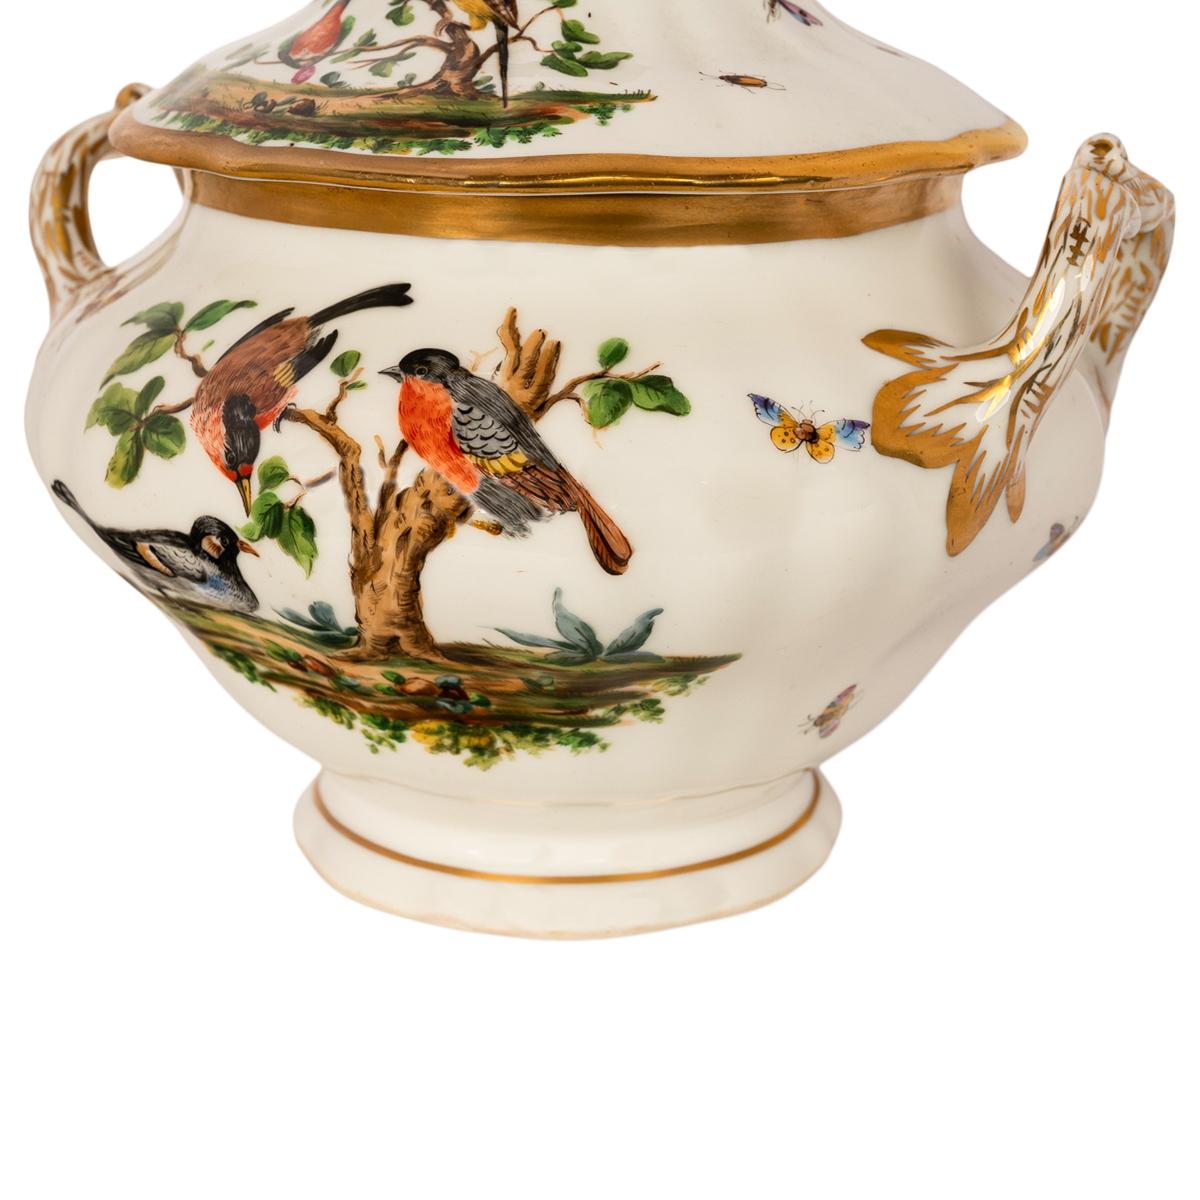 A very elegant antique 19th century KPM porcelain hand-painted & gilded lidded bowl/tureen, decorated with birds & butterflies, 1840-1895.
This very handsome lidded tureen made by the acclaimed German porcelain maker KPM  (Konigliche